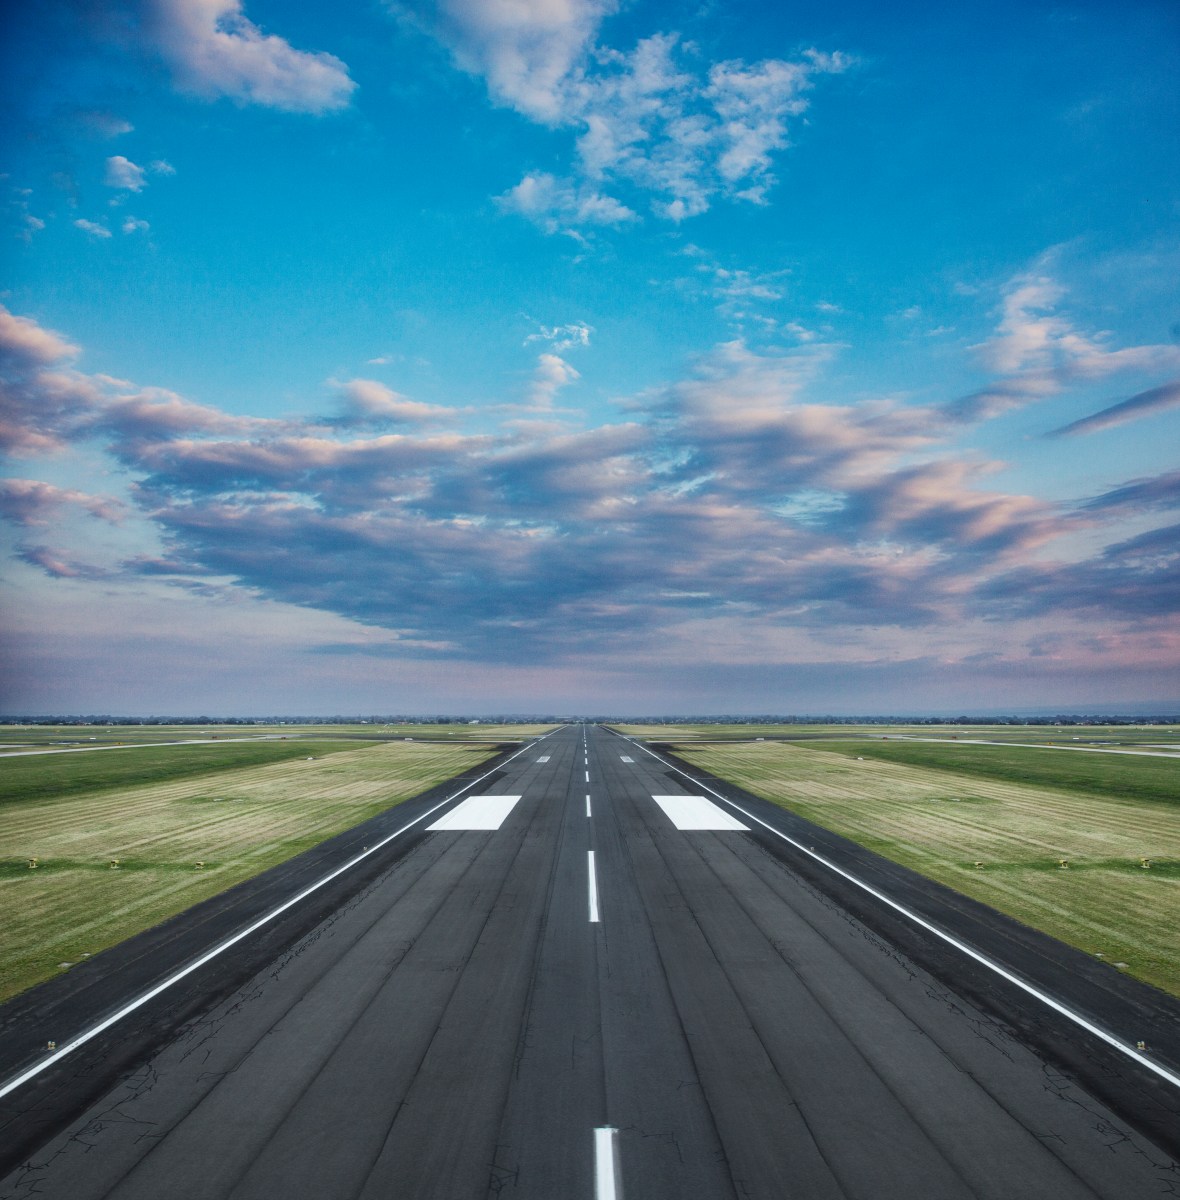 The ‘ideal runway’ is a myth, isn’t it? #News